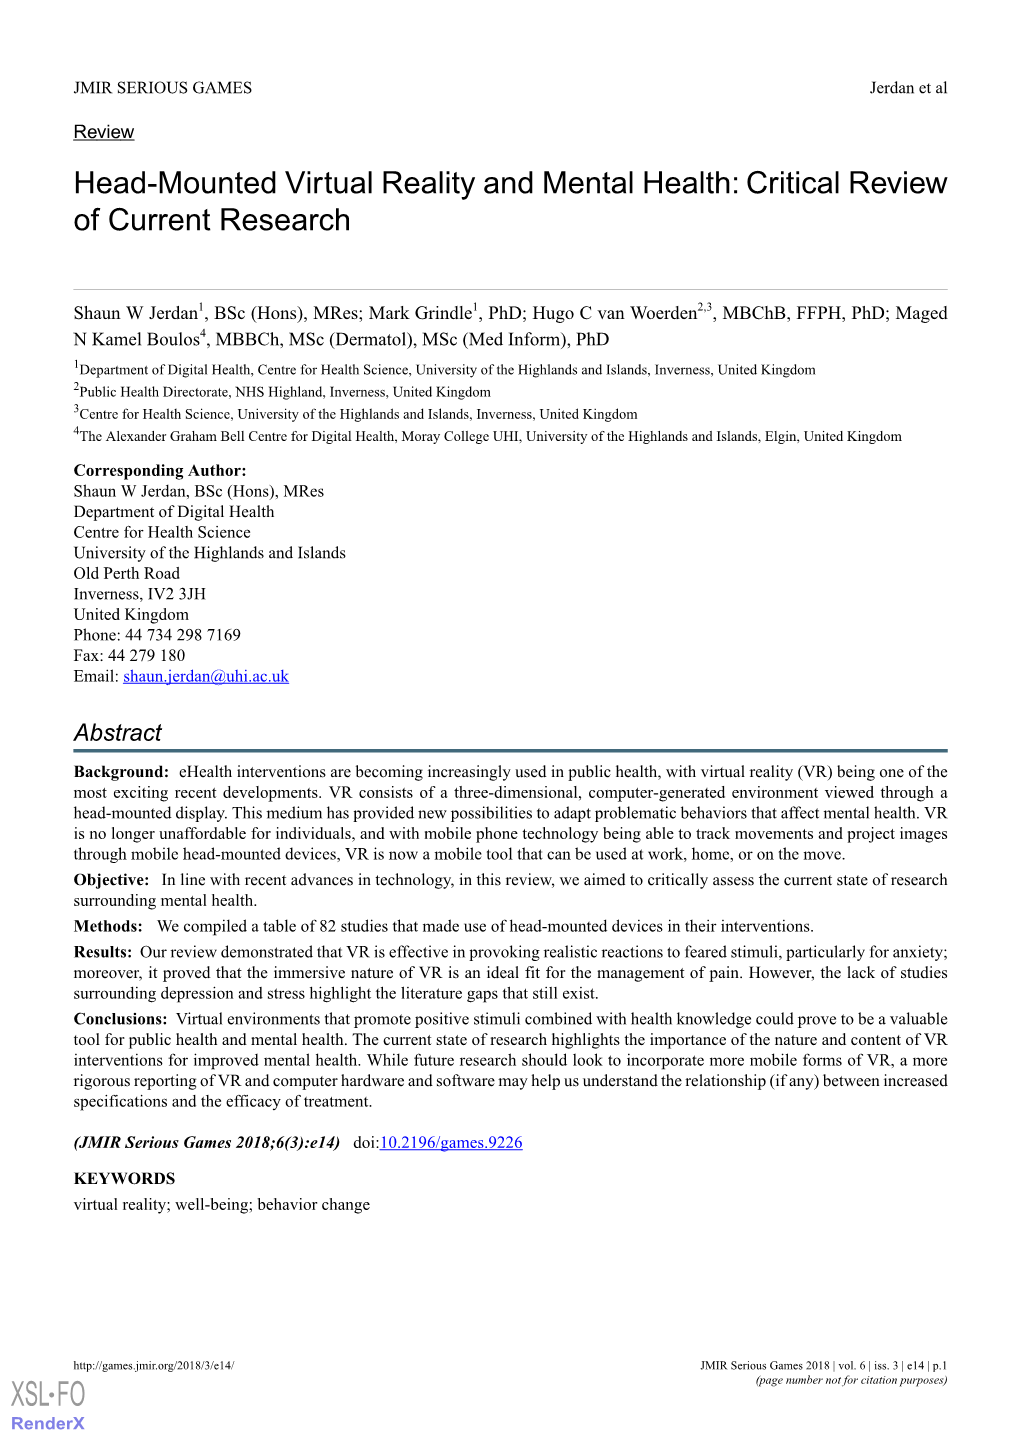 Head-Mounted Virtual Reality and Mental Health: Critical Review of Current Research